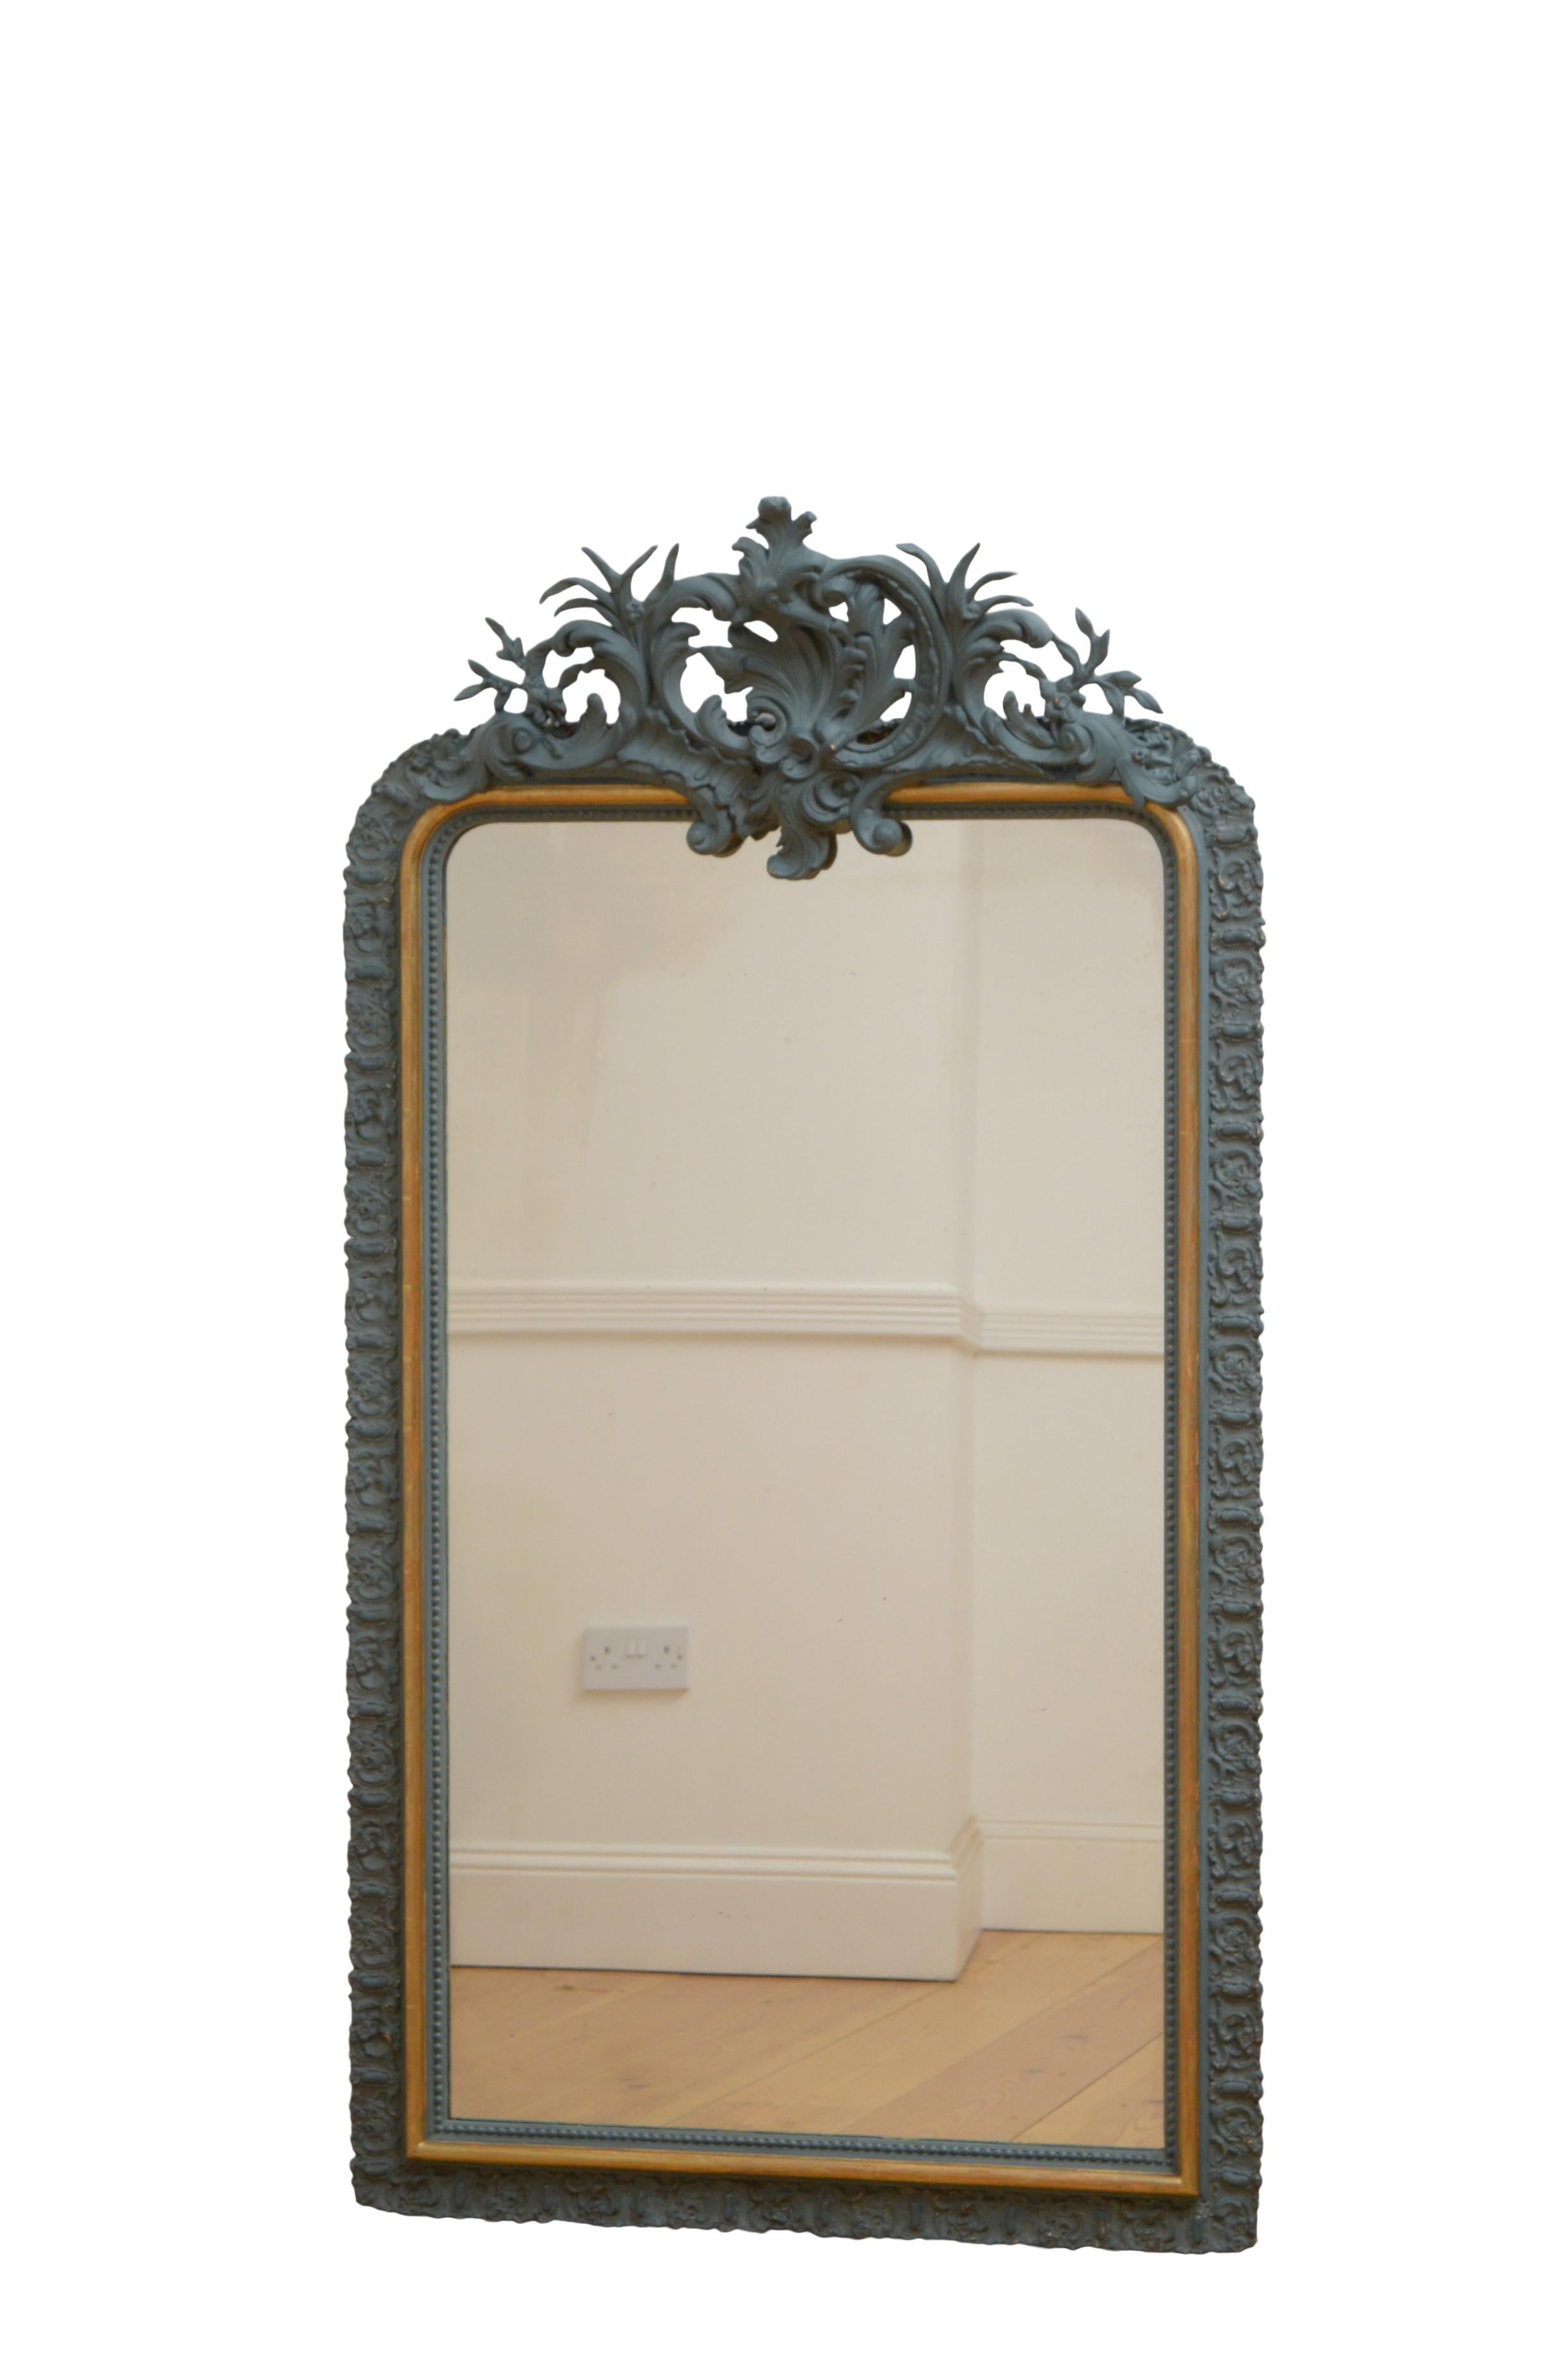 K0534 very attractive XIXth century giltwood and painted wall mirror, having original glass with minor imperfections in finely carved frame with floral crest to the centre, all in excellent home ready condition. c1860
Measures: H 60.5